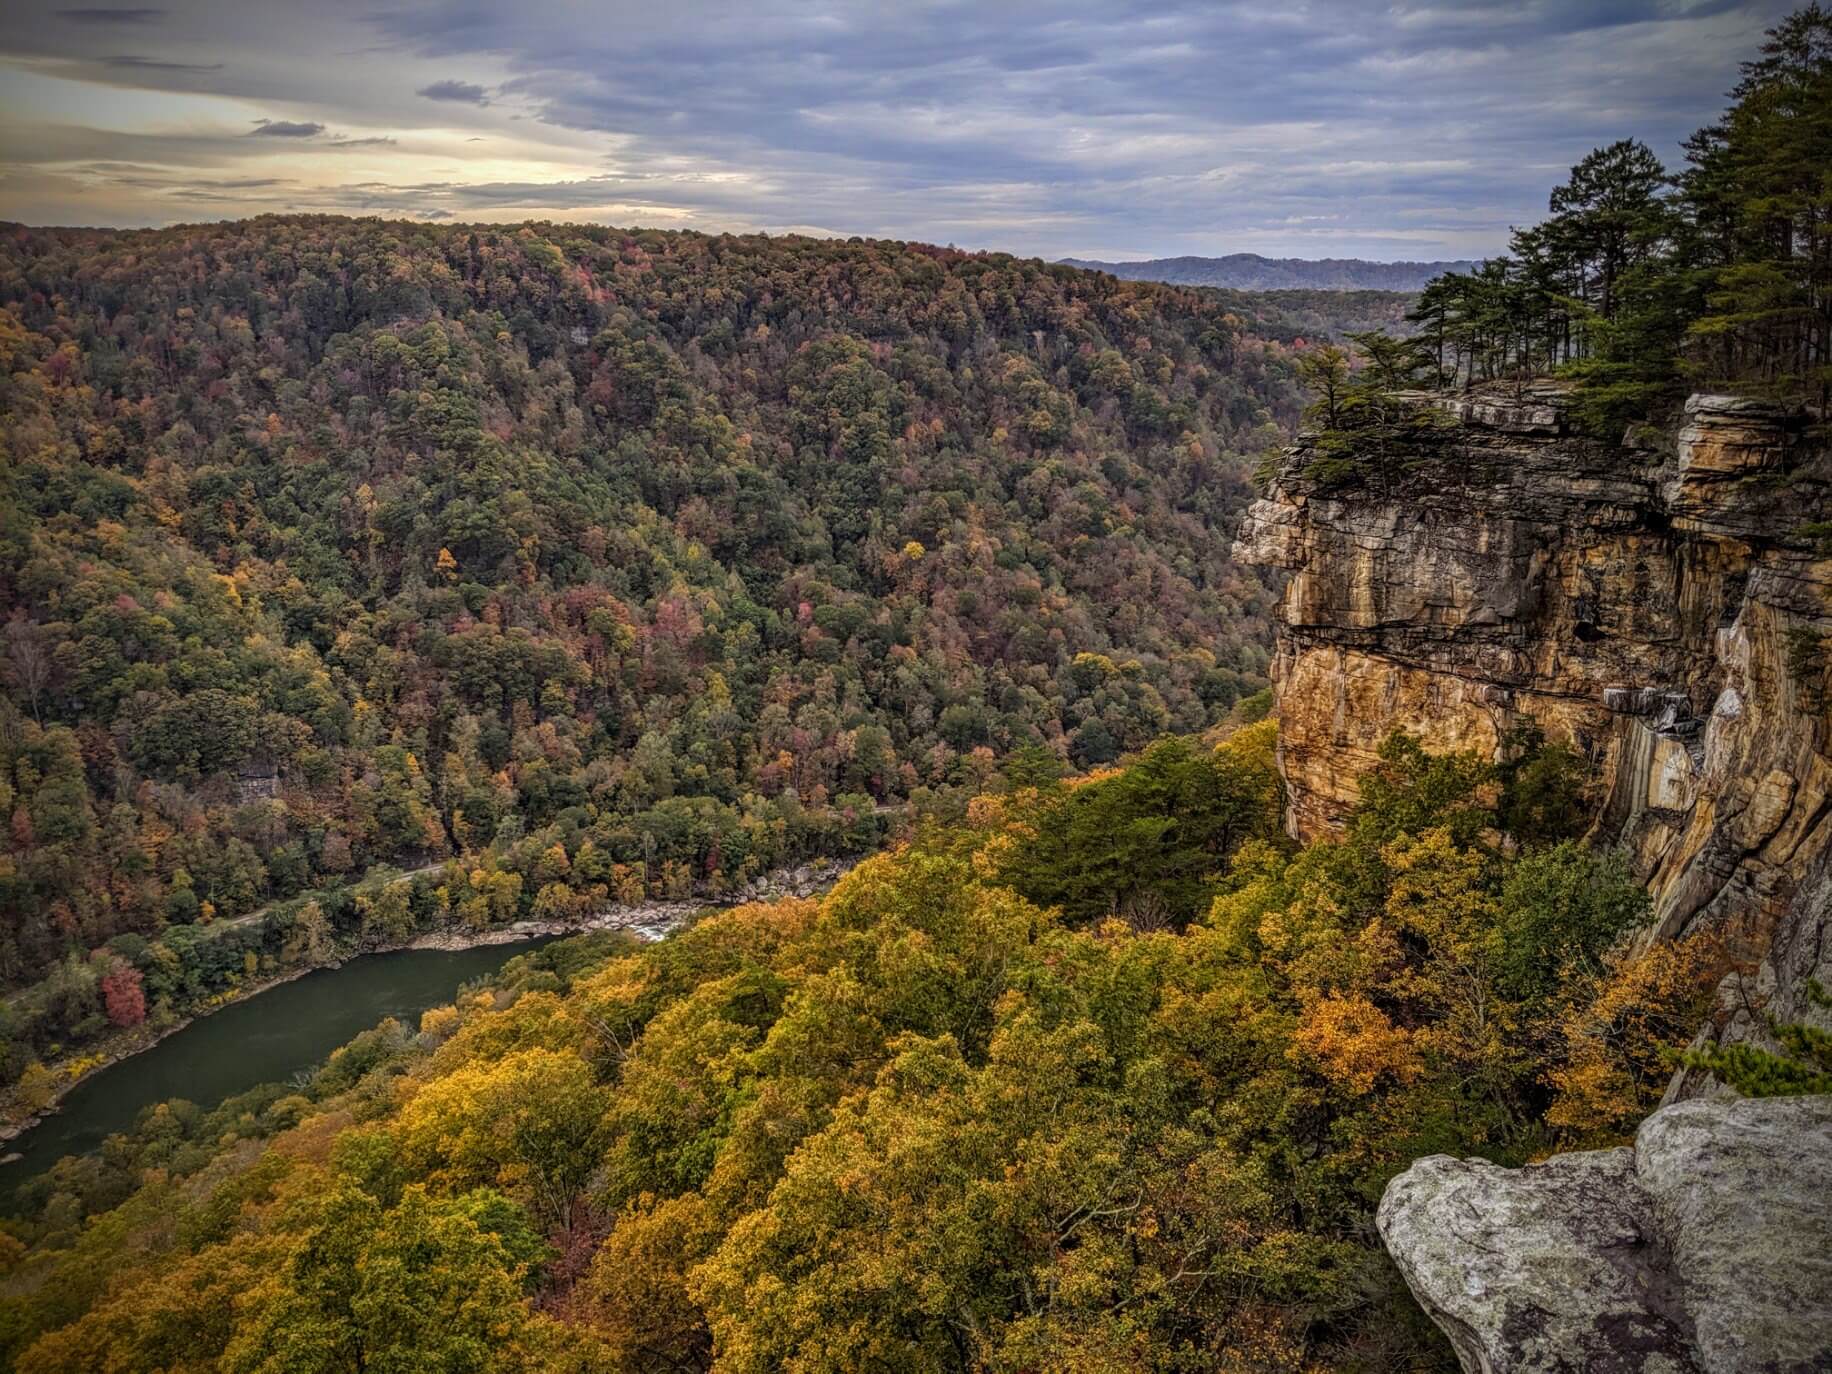 The Appalachian Mountains in the New River Gorge.